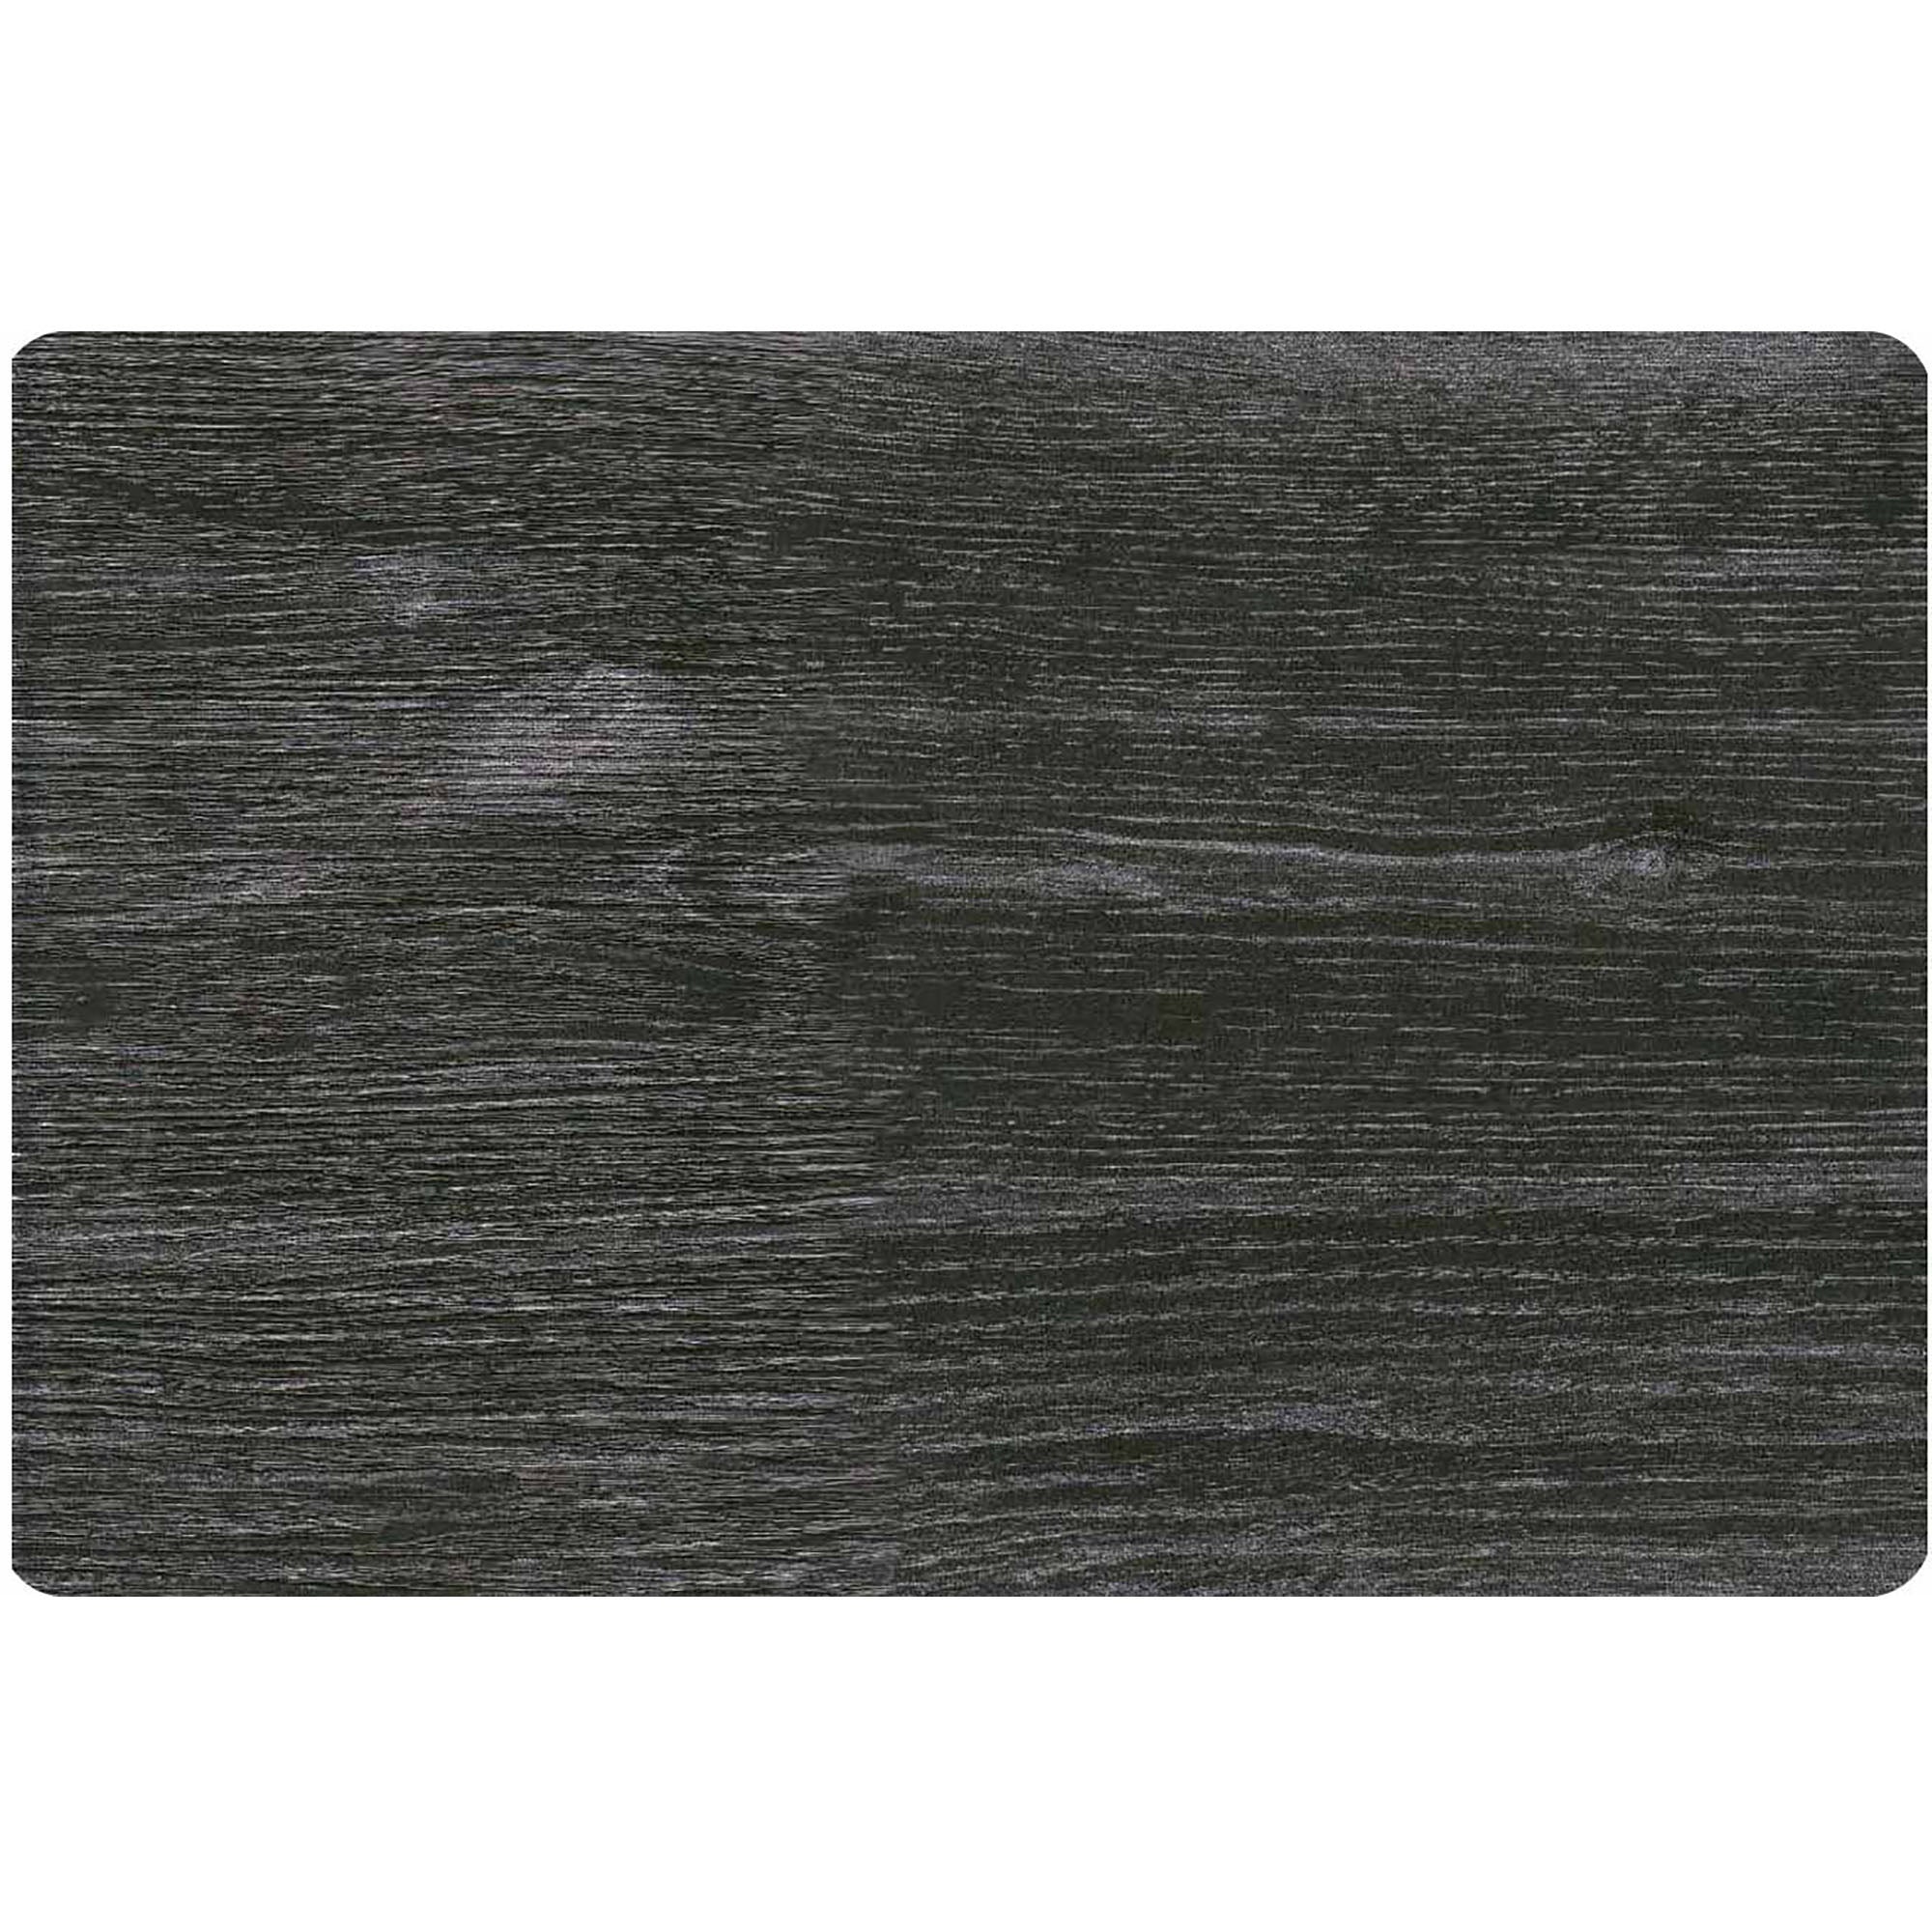 Black Wood Look Design Placemat 17.75x12in